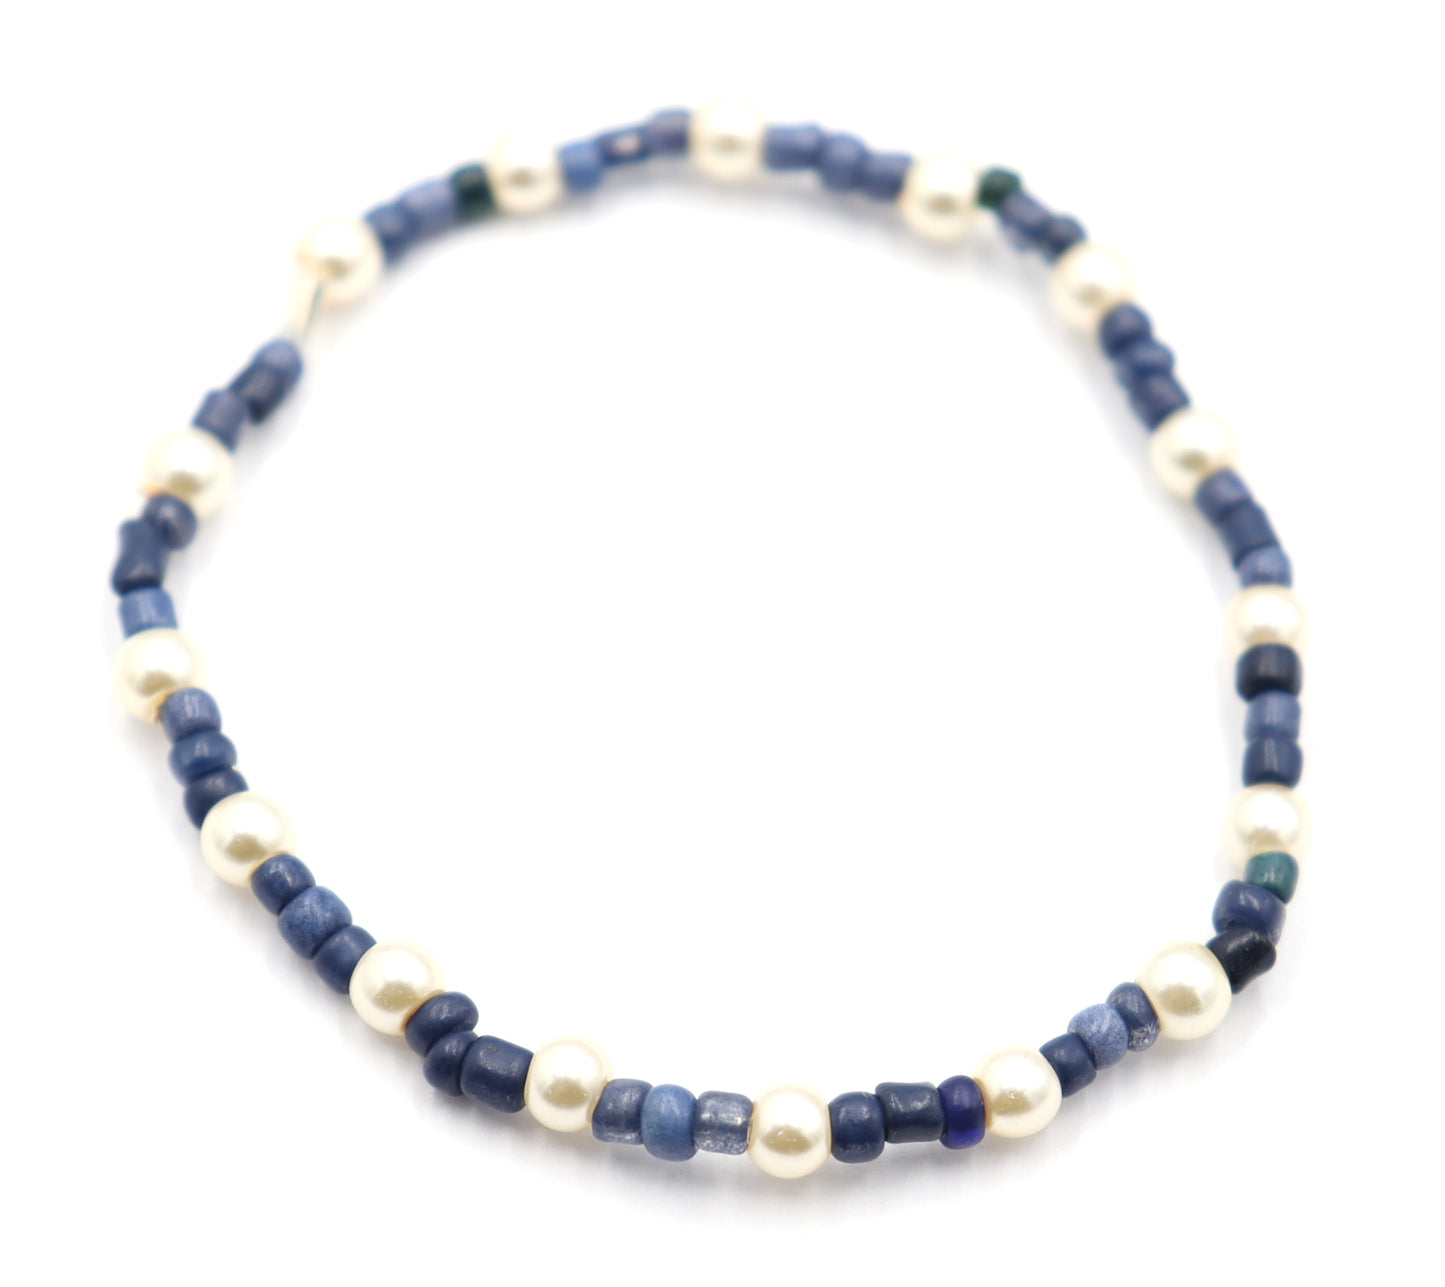 Classic and Classy Demin with Pearls - Blue and White Glass Bead Women's Stretch Bracelet by Monkey's Mojo